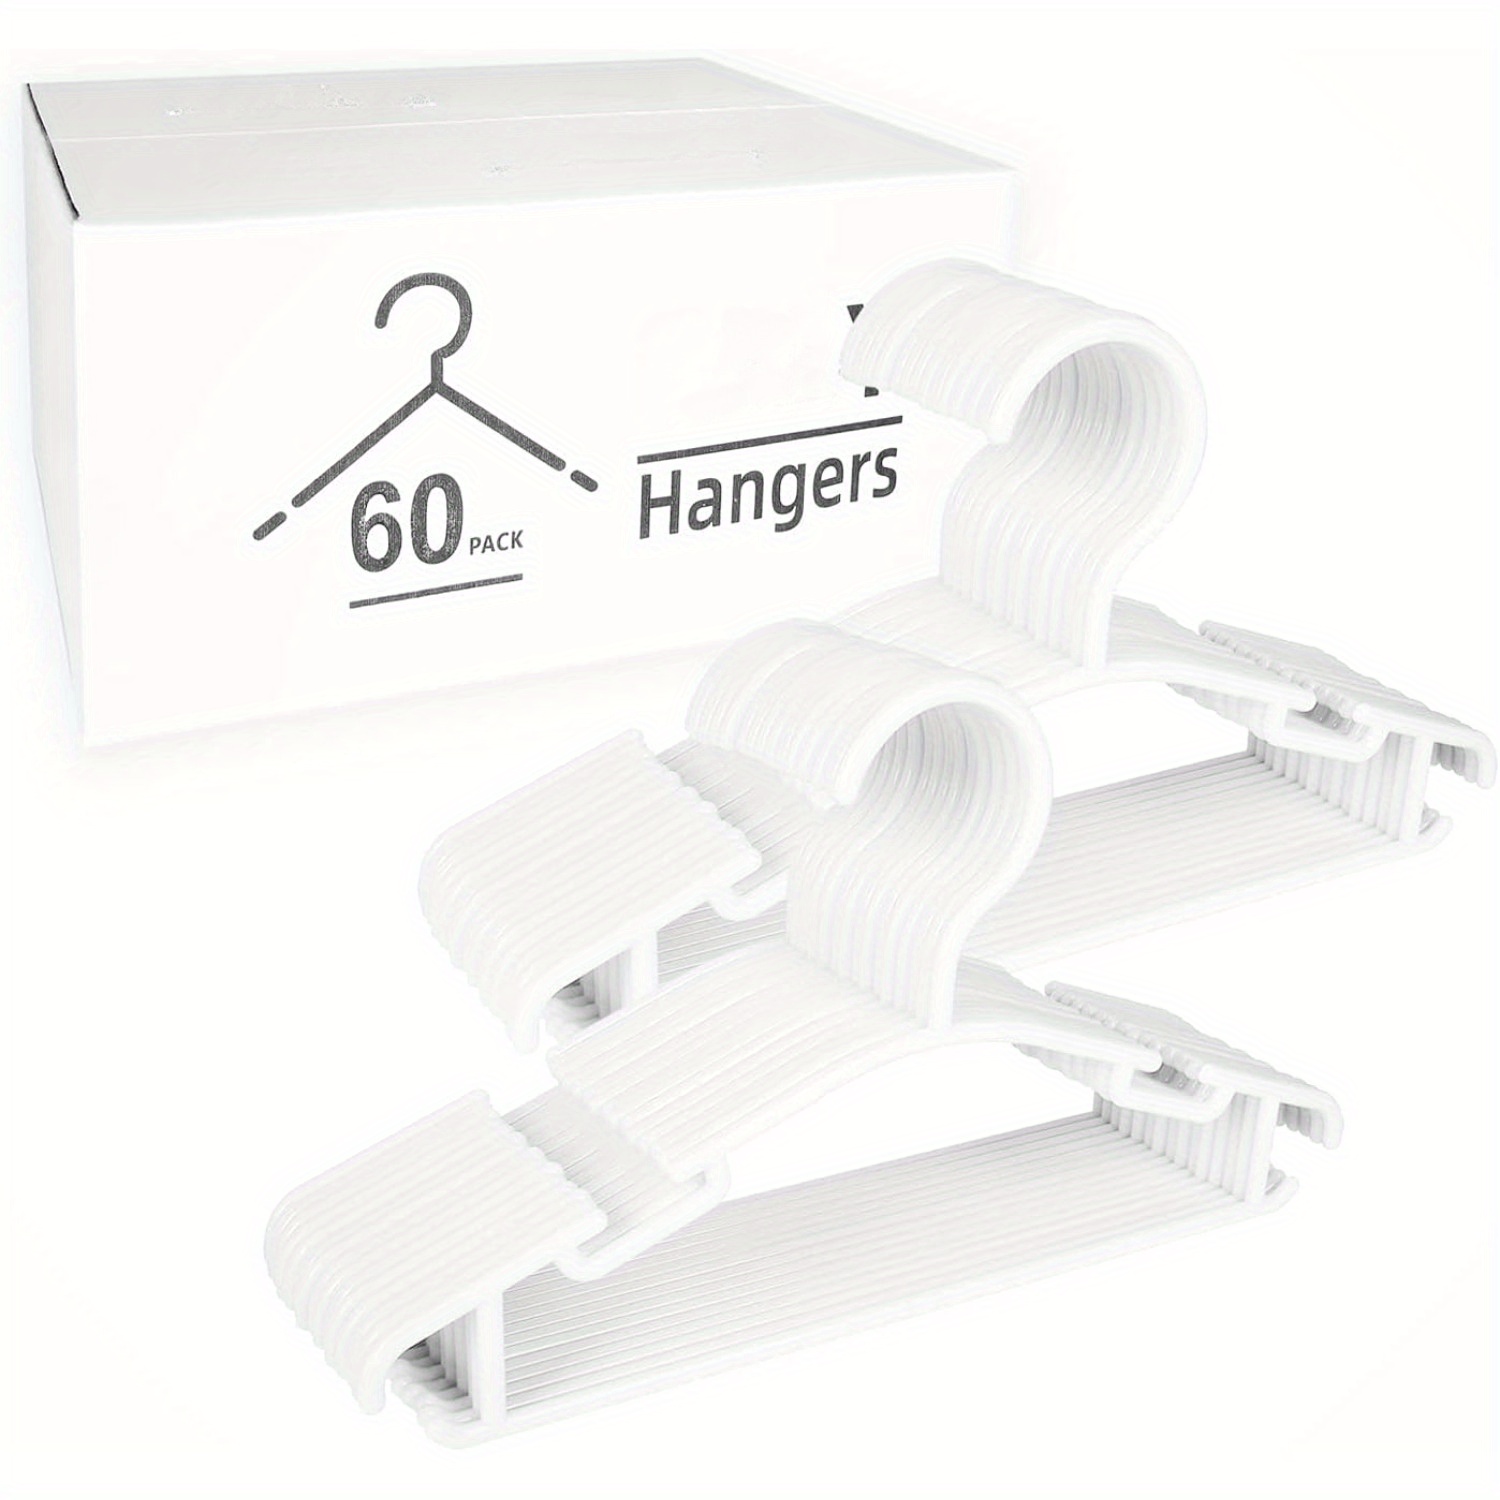 

60 Pcs Plastic Hangers, Small Hangers White, Light Weight, Hold Clothes And Organize Closets